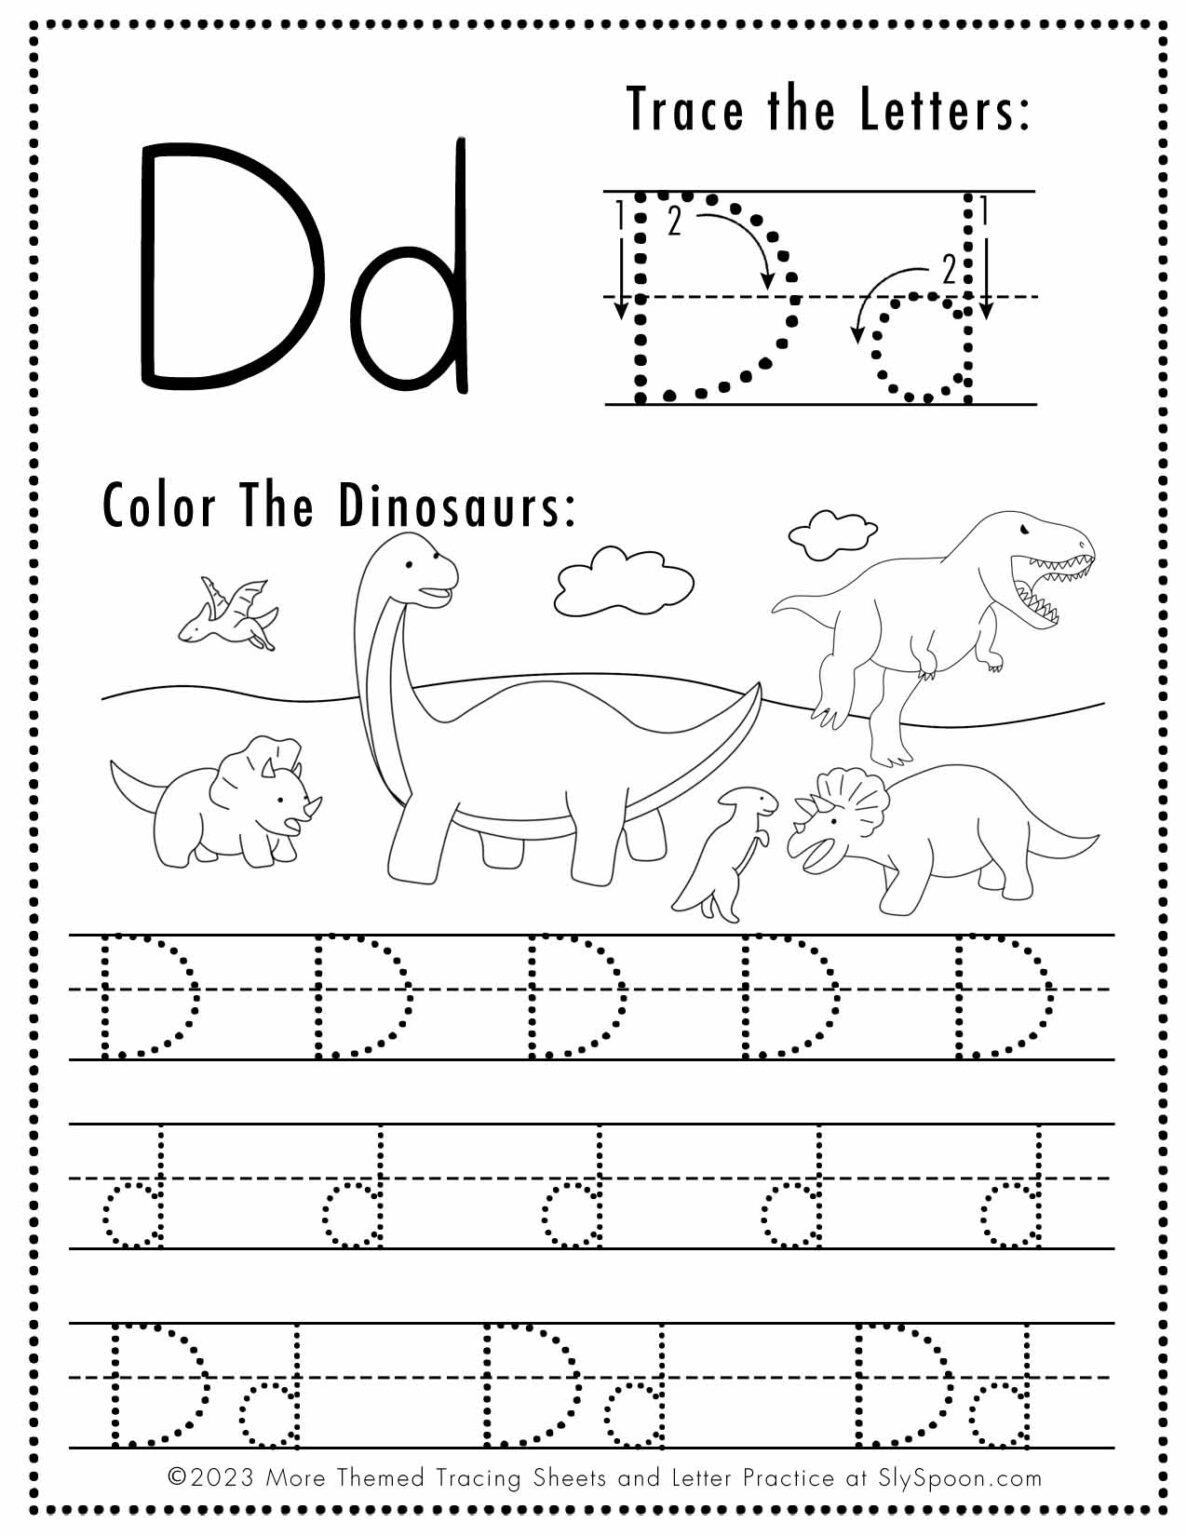 Free Letter D Tracing Worksheet (Printable) Dinosaur Themed - Sly Spoon